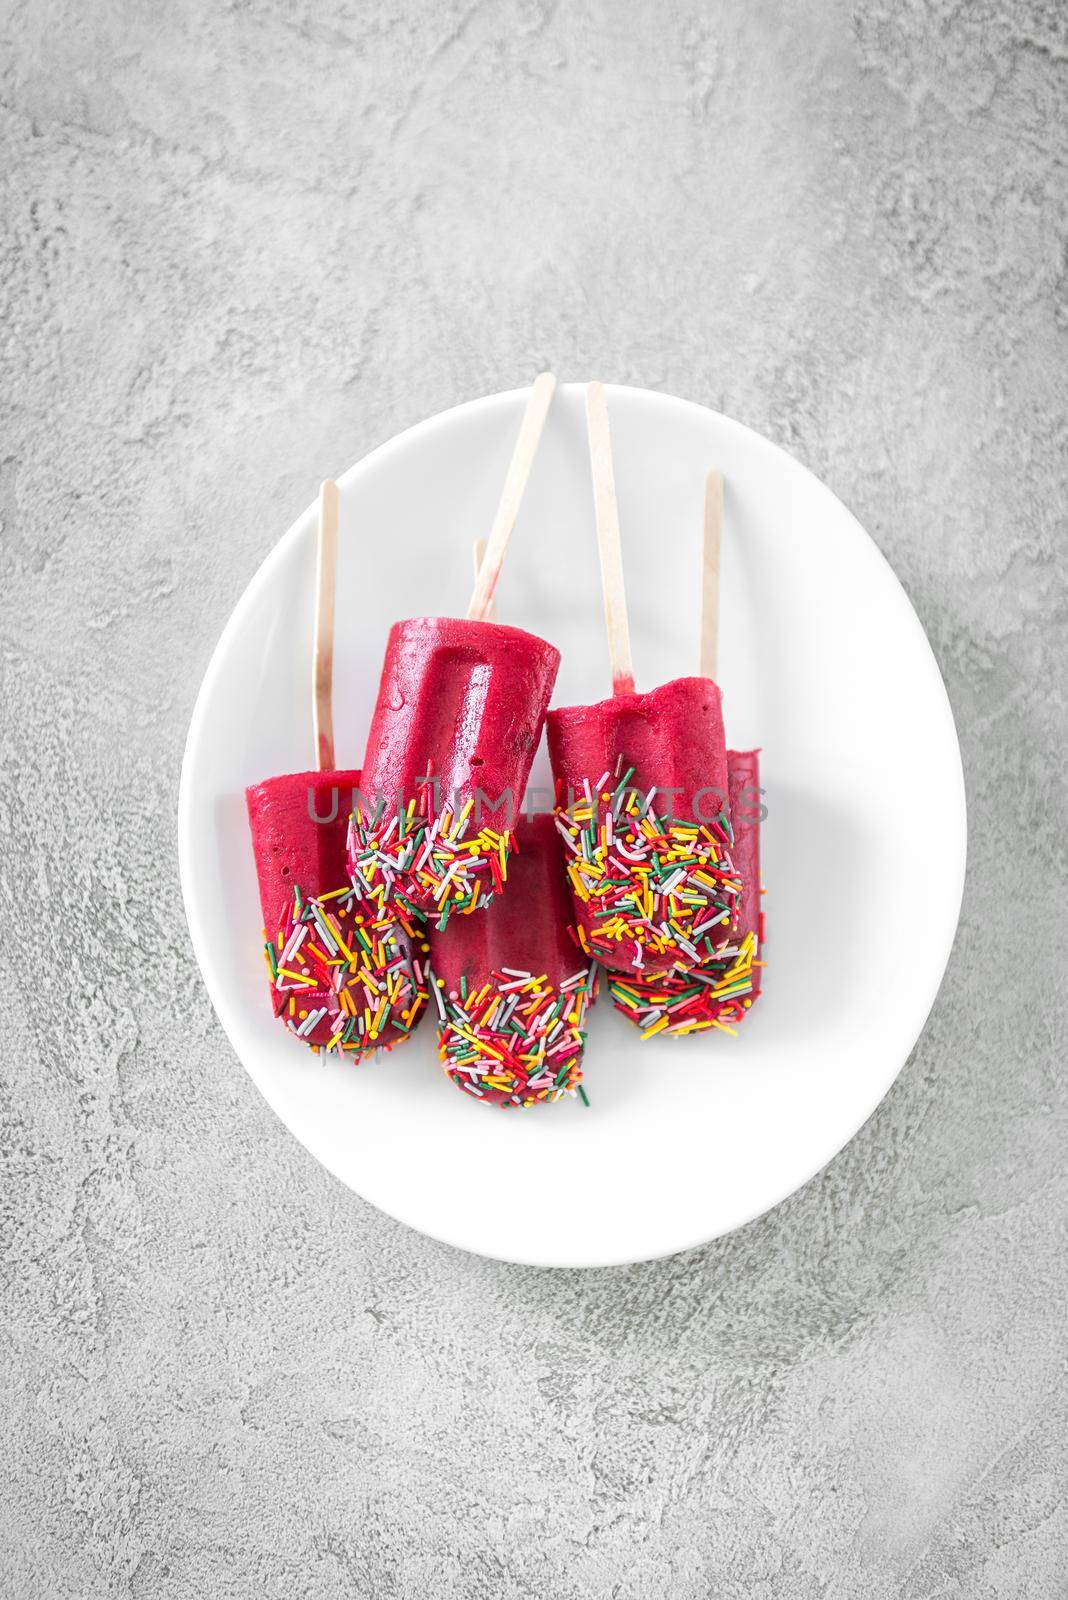 sprinkled popsicles made with red currant, raspberry, topview by tan4ikk1